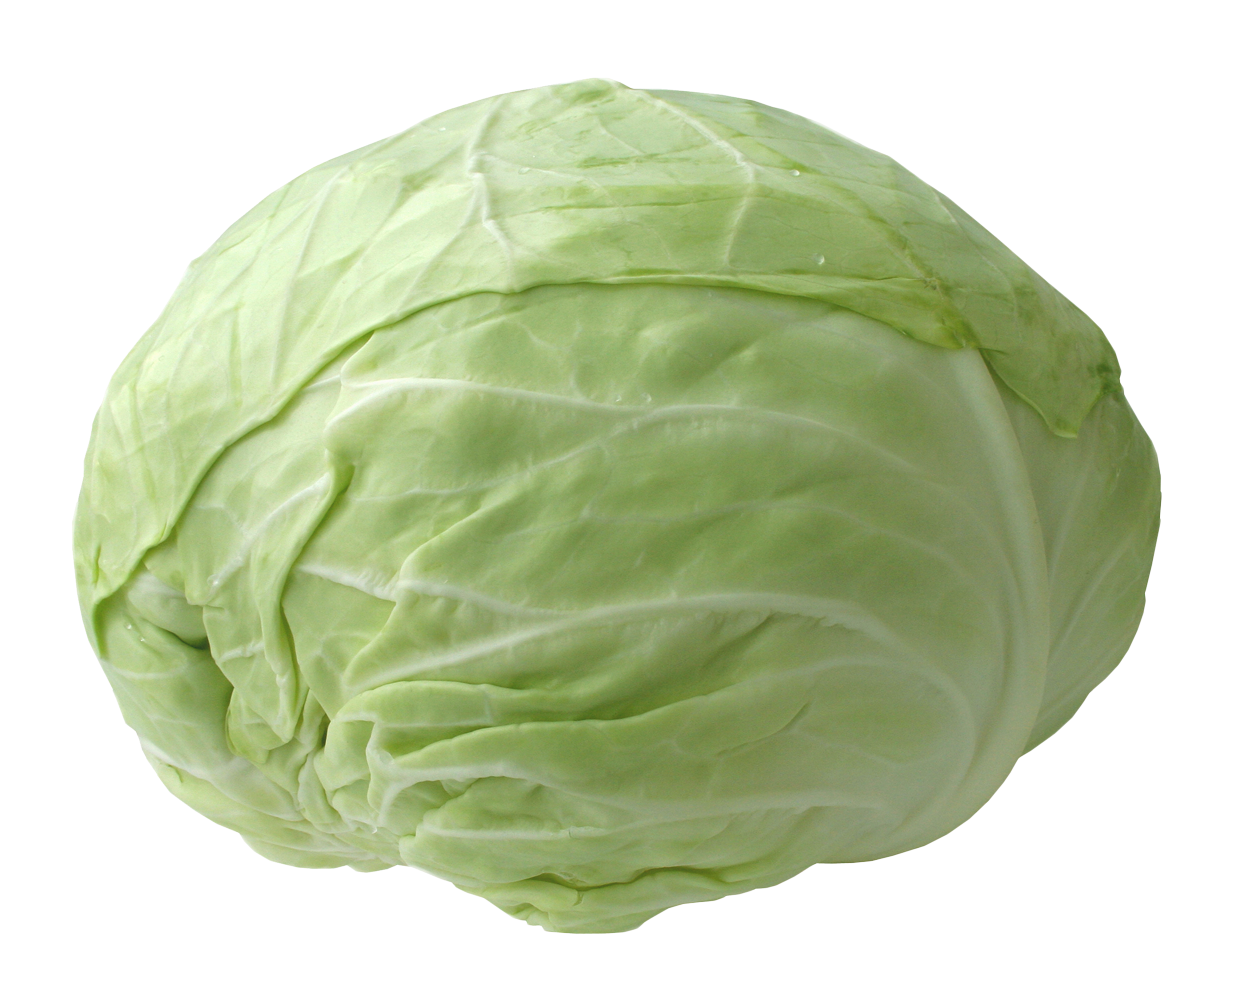 A Head Of Cabbage On A Black Background